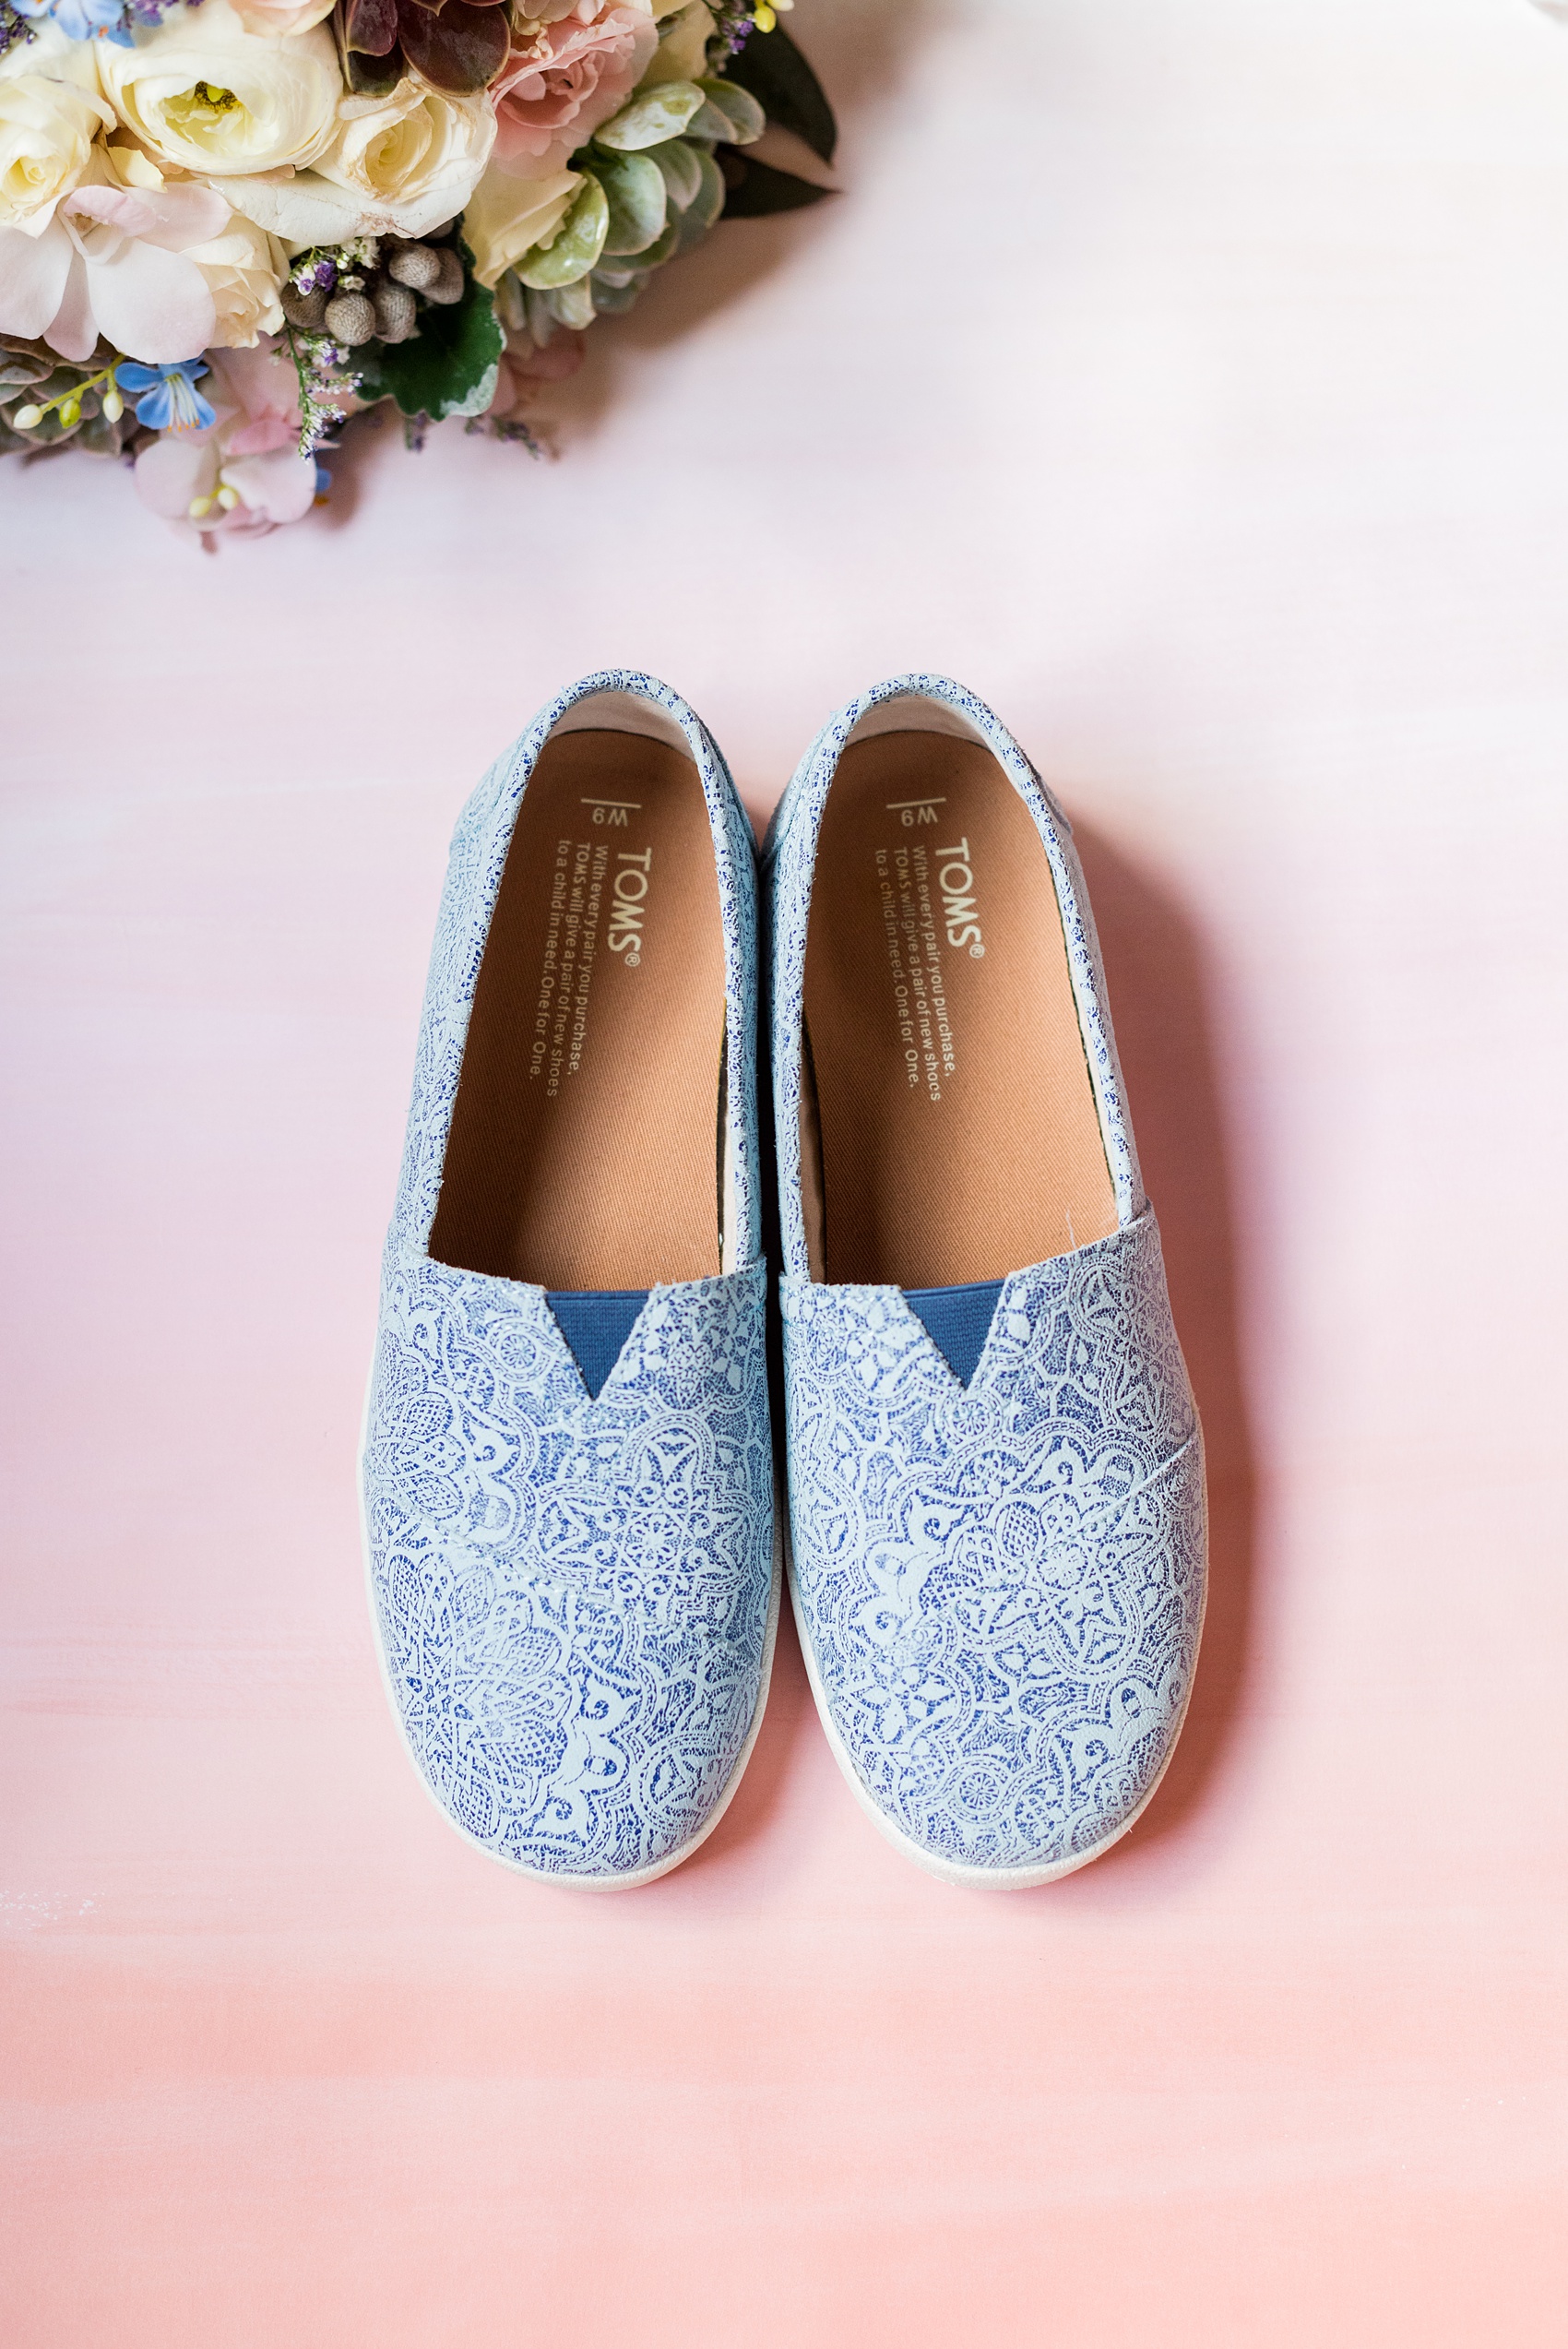 Crystal Springs Resort wedding photos in New Jersey, with photographer Mikkel Paige Photography. The couple’s spring wedding had an outdoor ceremony with photos at this rustic, woodsy venue showing their blue and pink palette decor from getting ready to their reception. This detail picture shows the bride's blue lace pattern Toms she wore to stay comfortable in flat shoes the entire day. Click through to see their complete wedding recap! #NewJerseywedding #MikkelPaige #NJweddingphotographer #NJphotographer #TOMS #TOMSbride #TOMSshoes #TOMSwedding